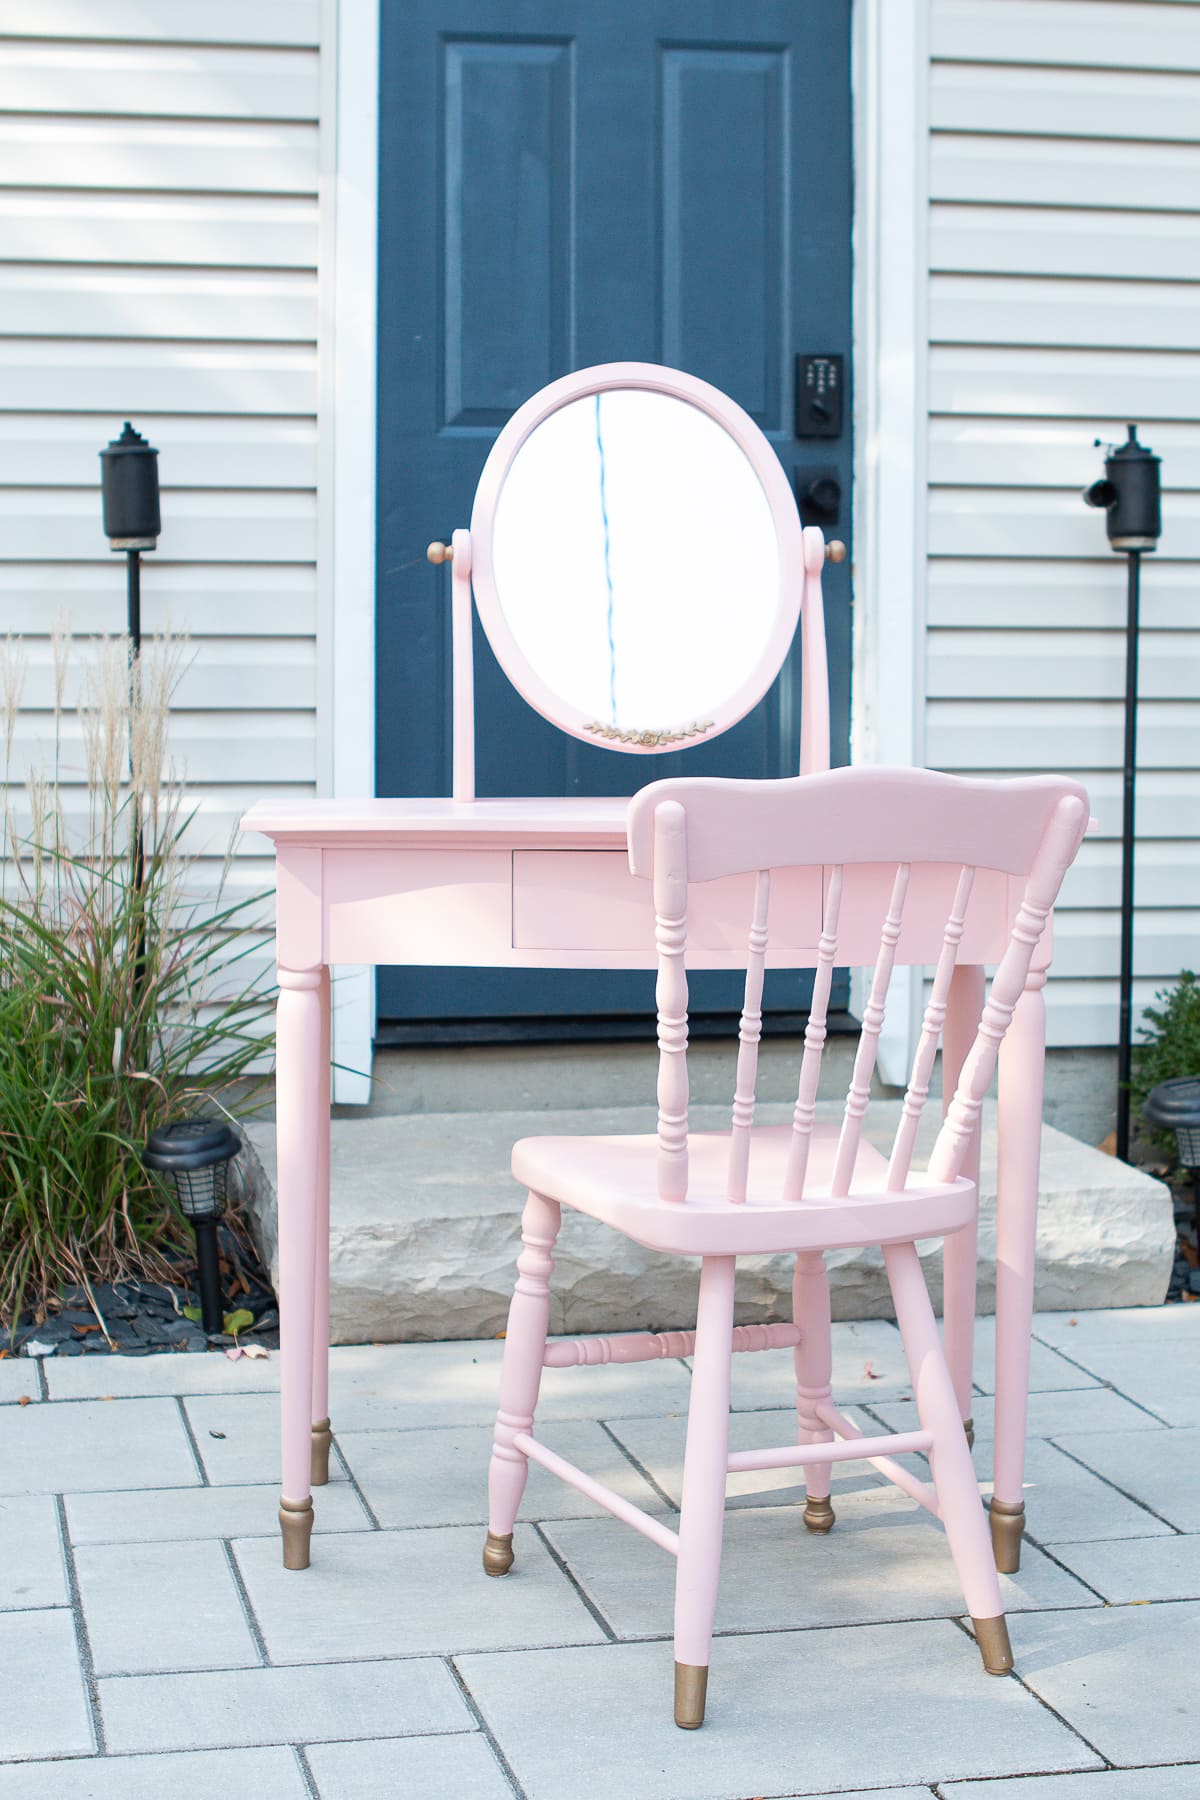 How to use chalk paint on old furniture